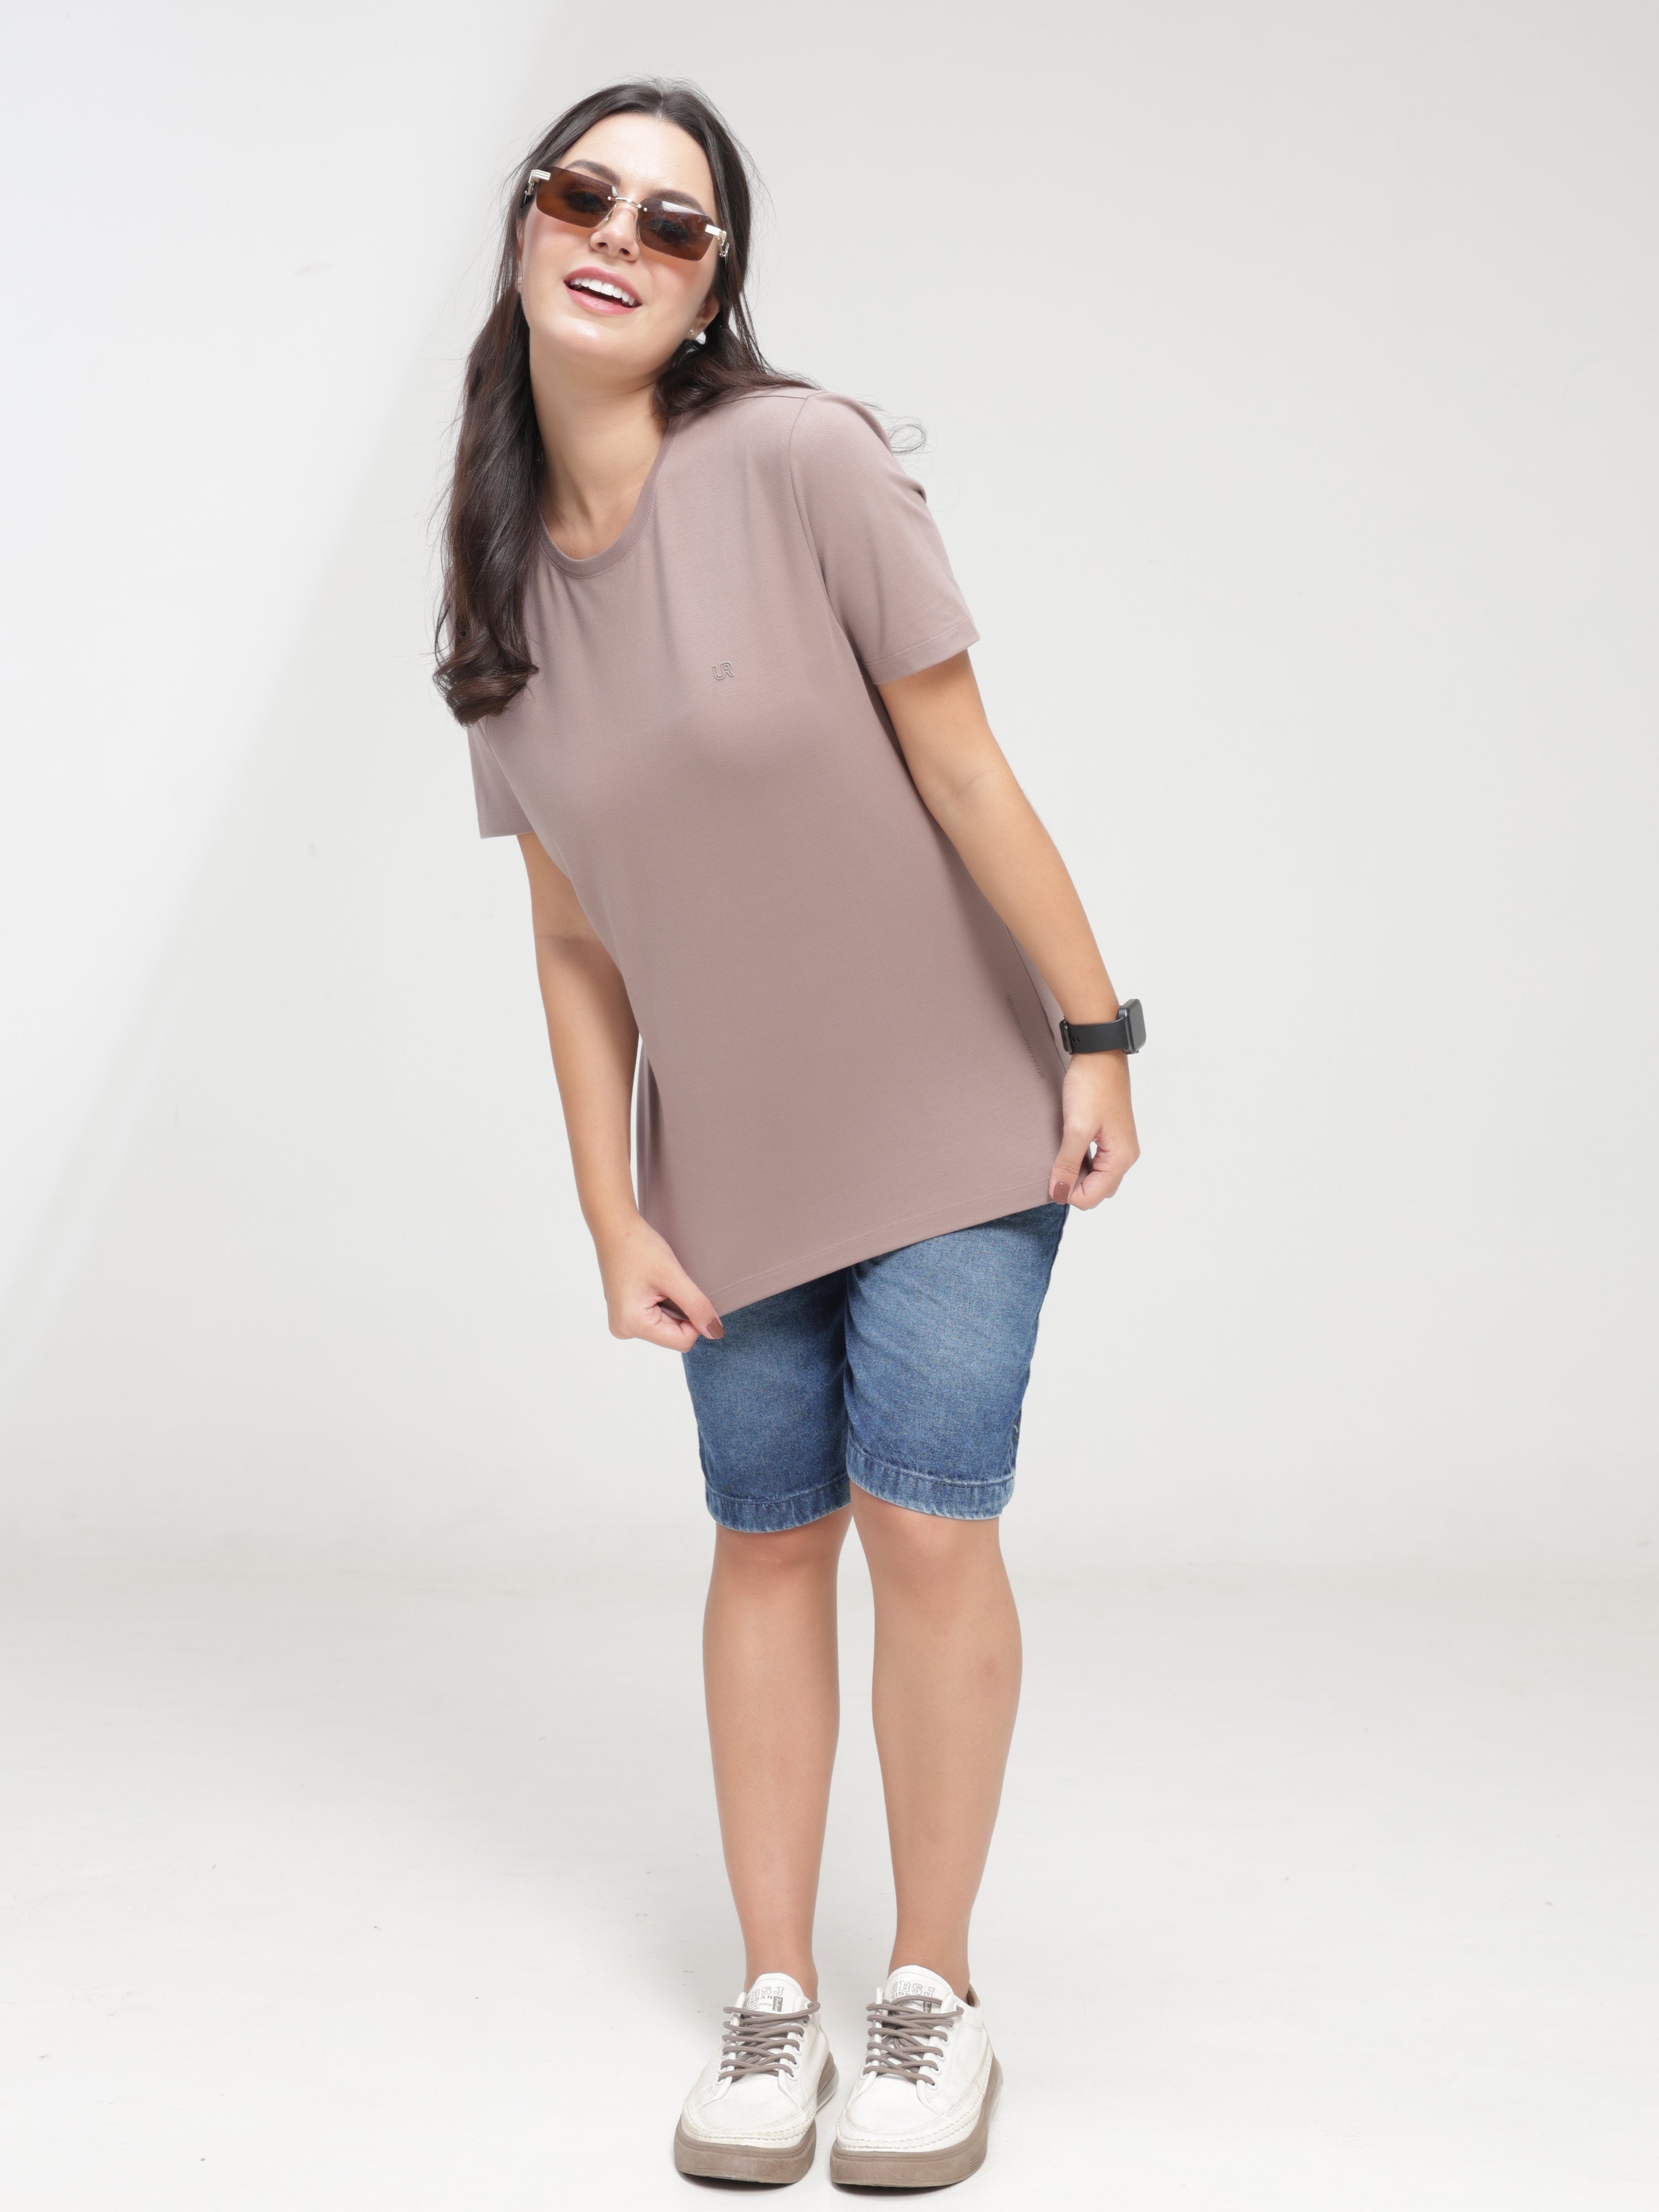 Woman wearing Dusky Maroon Turms T-shirt, anti-stain, anti-odor, stretchable, tailored fit, crew neckline, paired with denim shorts.